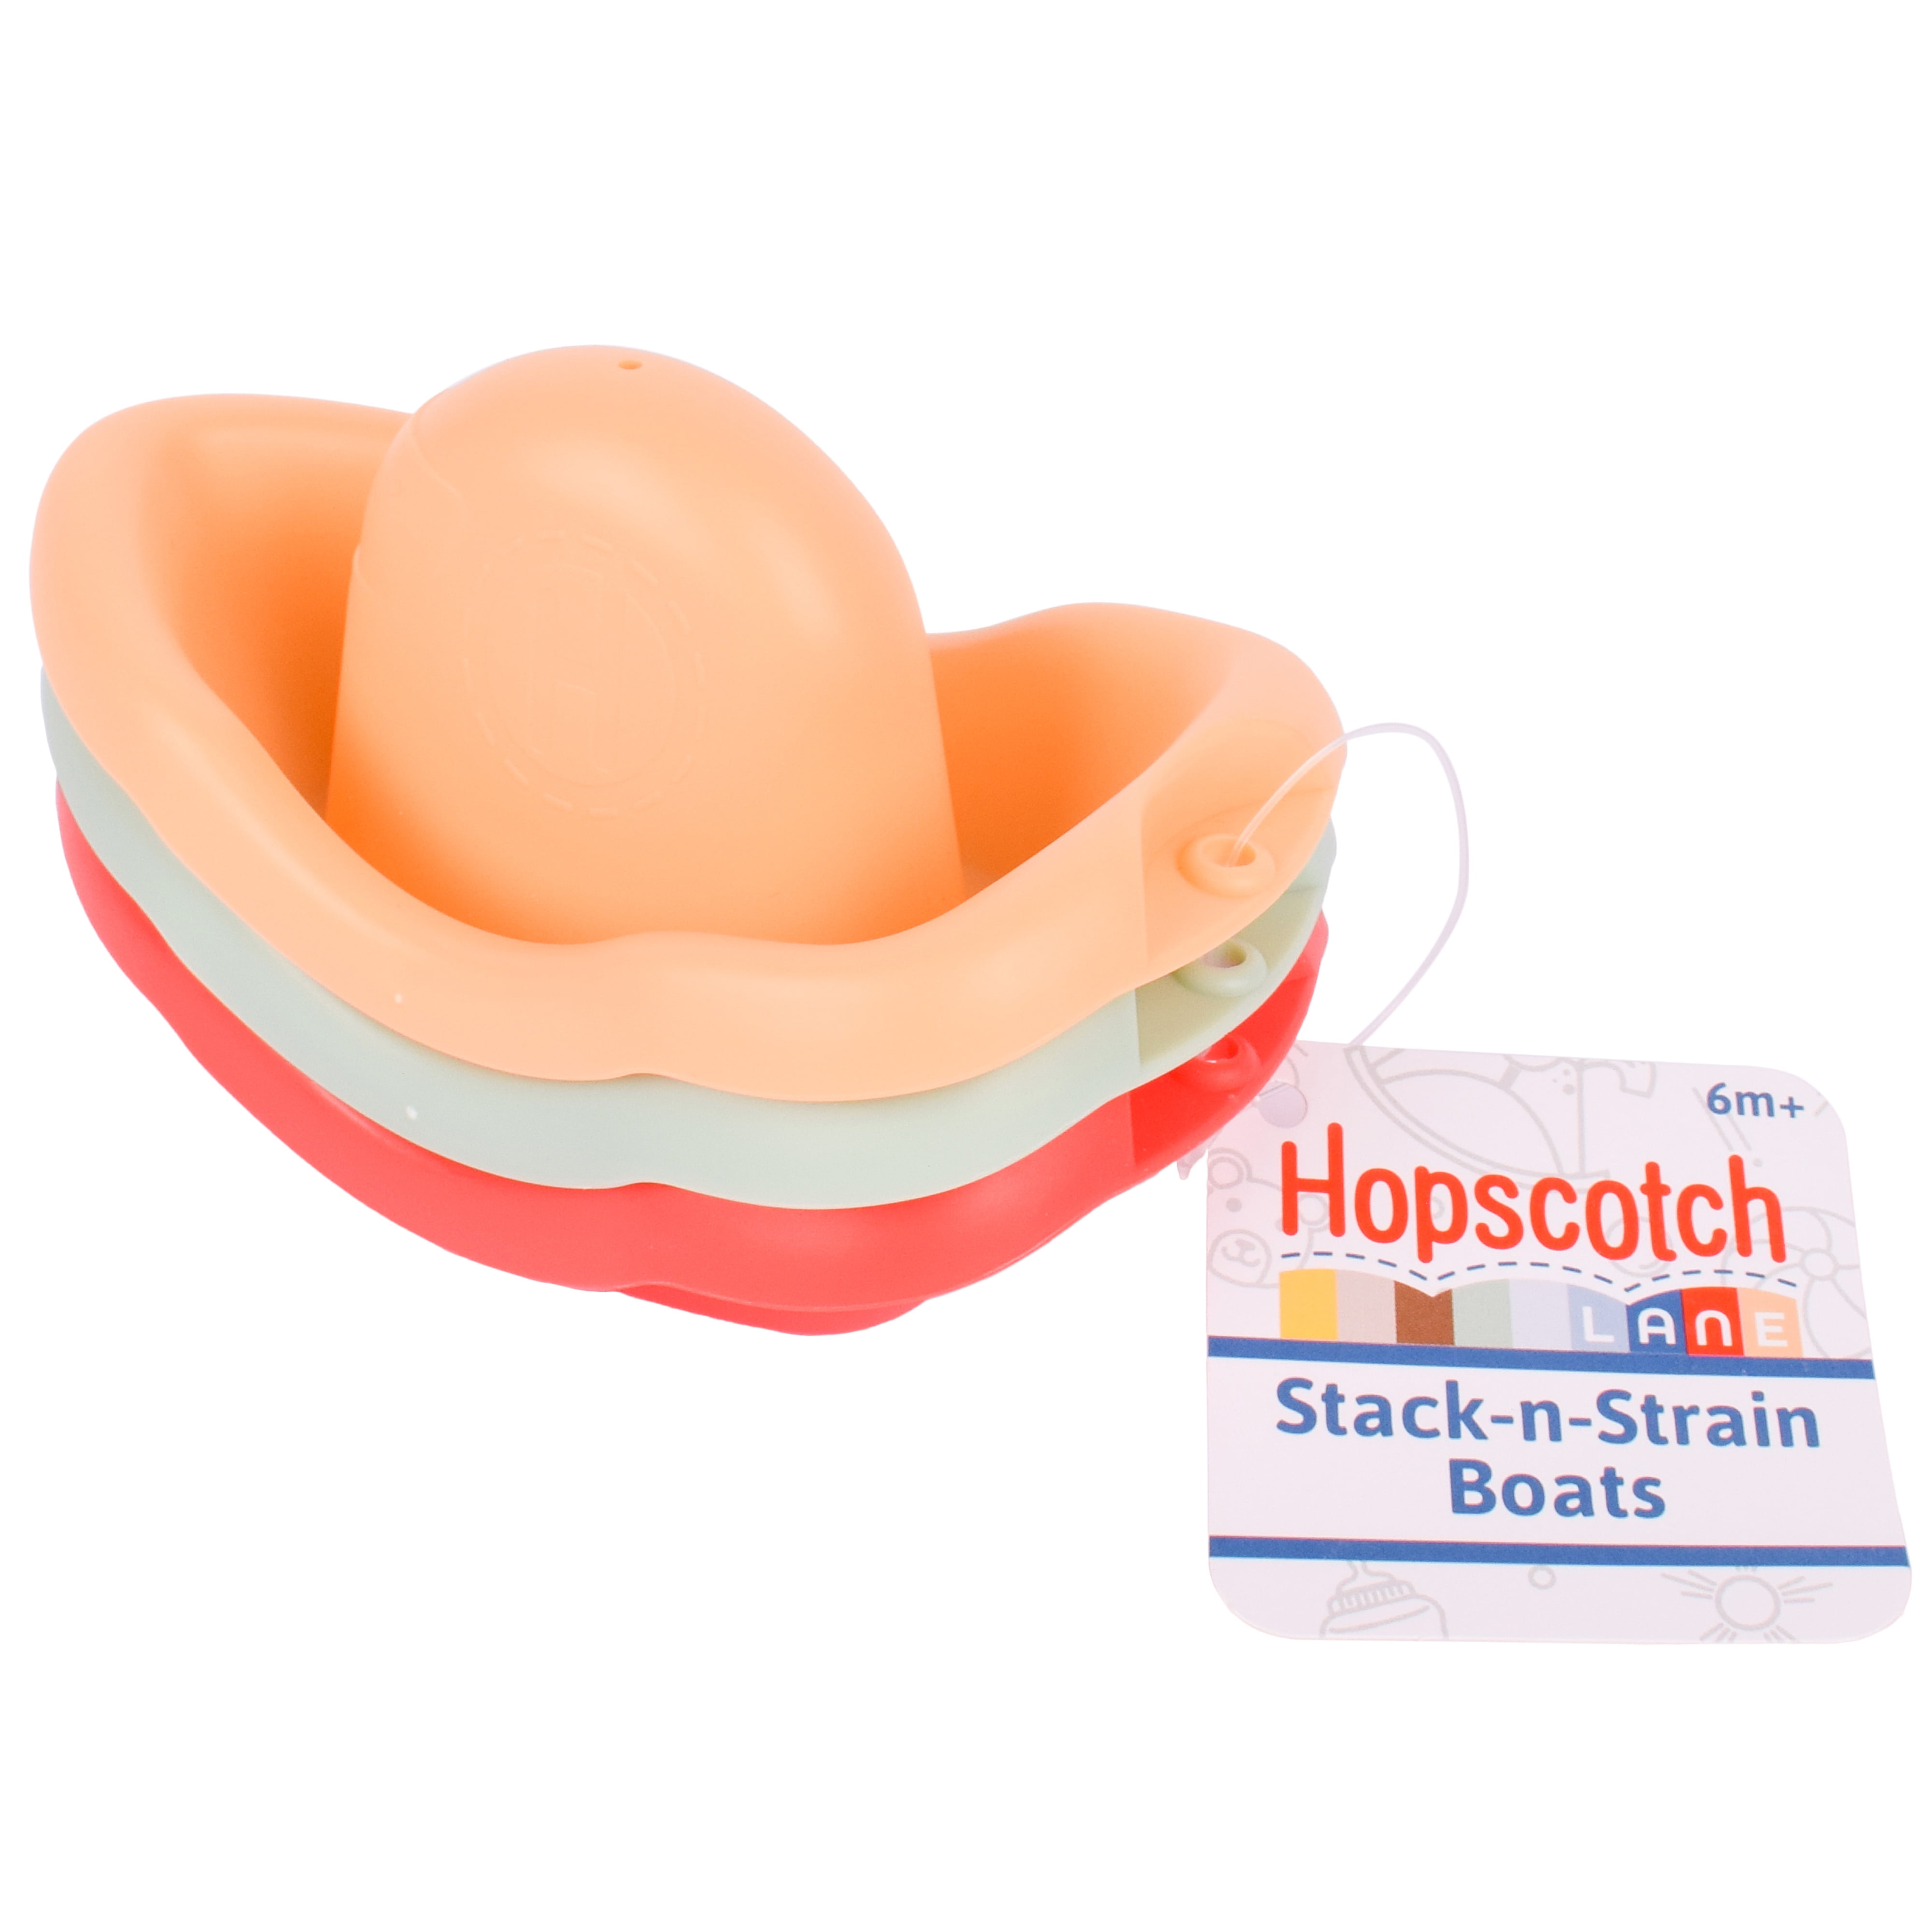 Hopscotch Lane Stack and Strain Boats - 3 Pack Bath Toy, Baby and Toddler 6+ Months